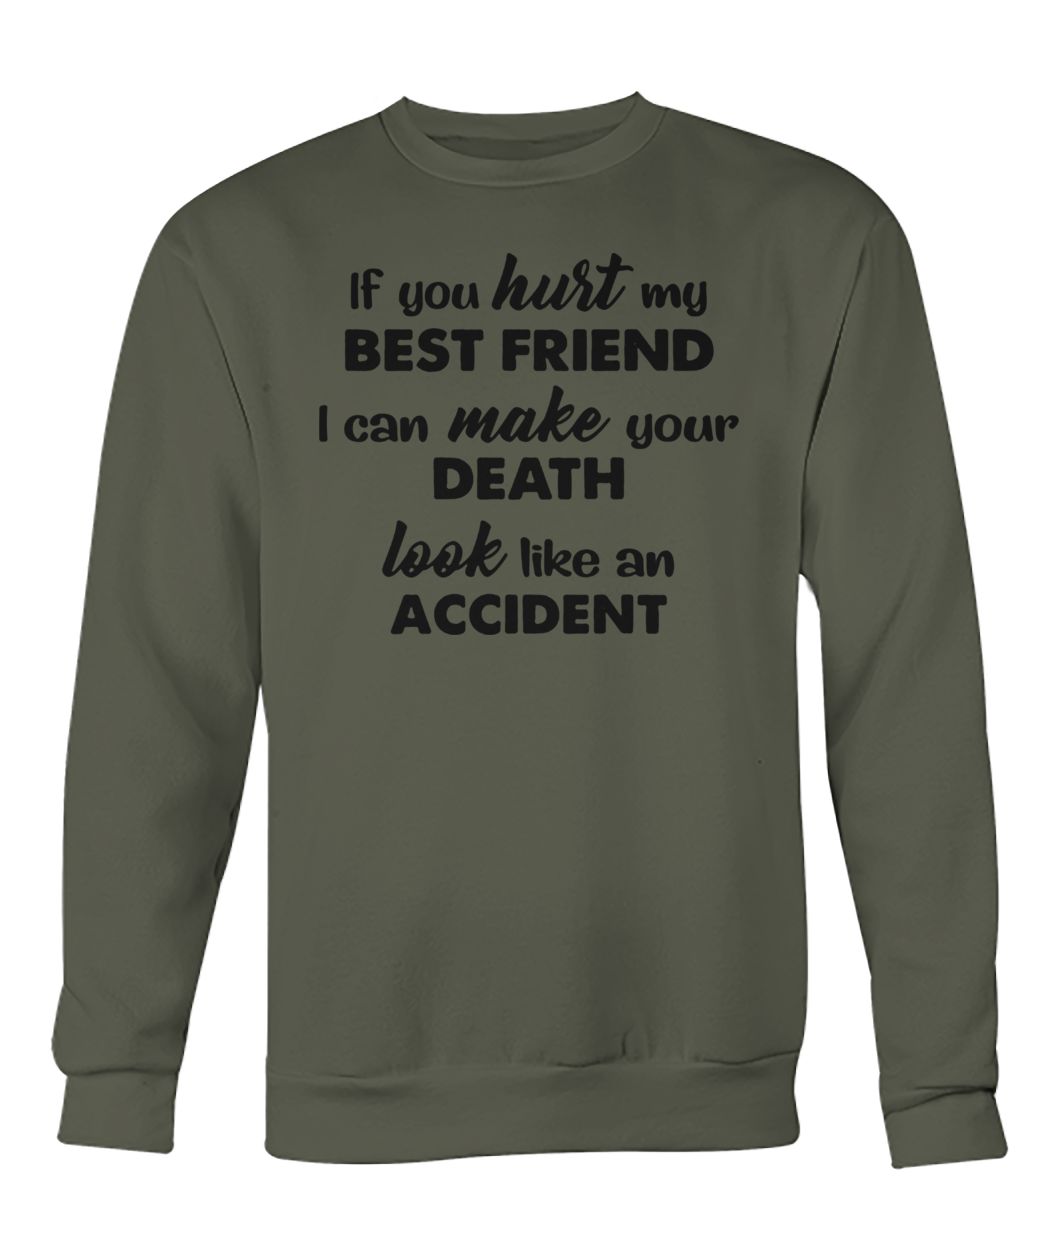 If you hurt my best friend I can make your death look like an accident crew neck sweatshirt